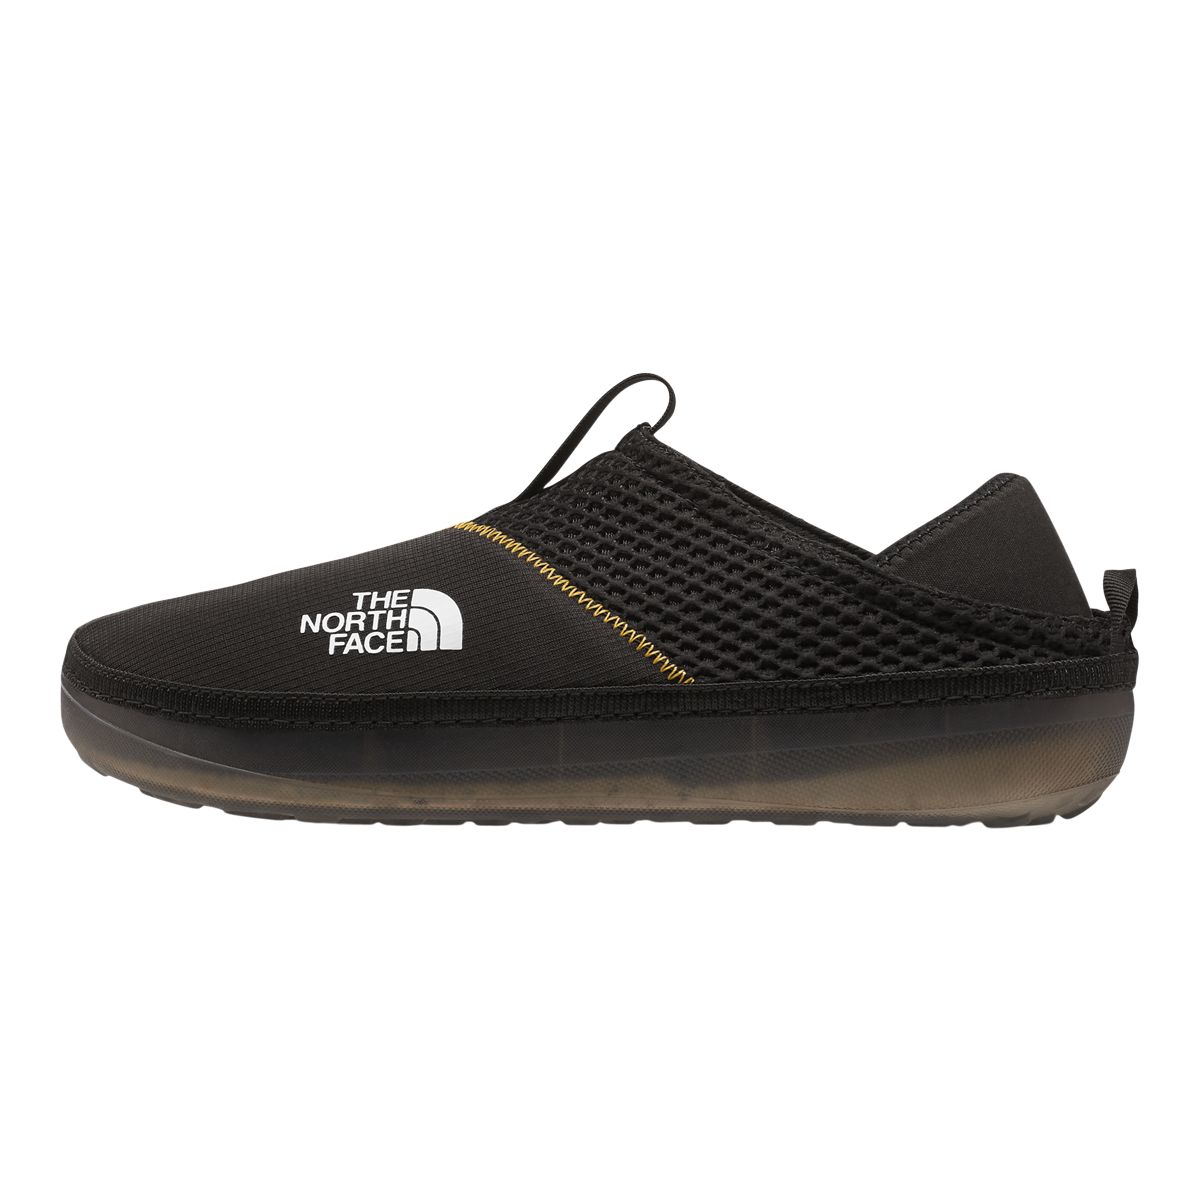 The North Face Men's Base Camp Mule Slippers